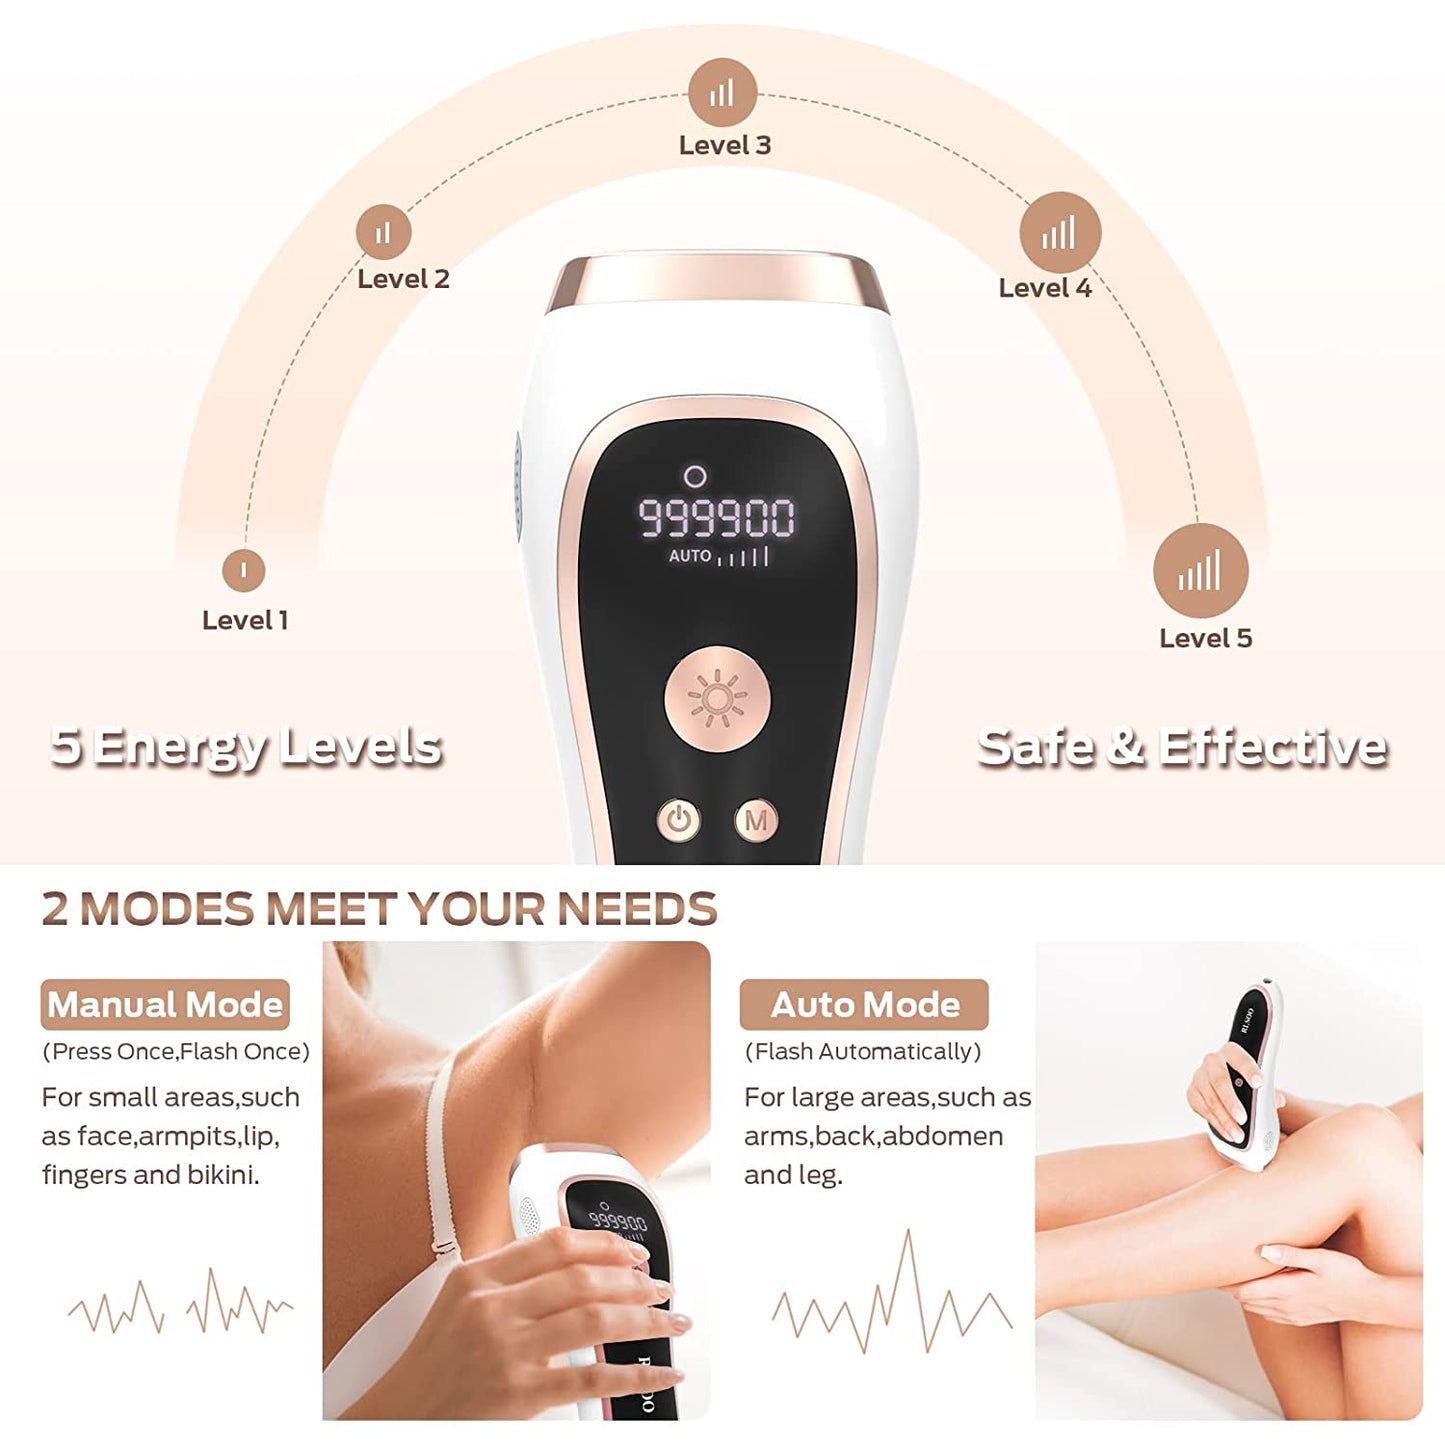 Laser Hair Removal, At-Home IPL Hair Removal for Women Permanent Hair Removal Device Upgraded to 999,900 Flashes Painless Hair Remover for Armpits Back Legs Arms Bikini Line